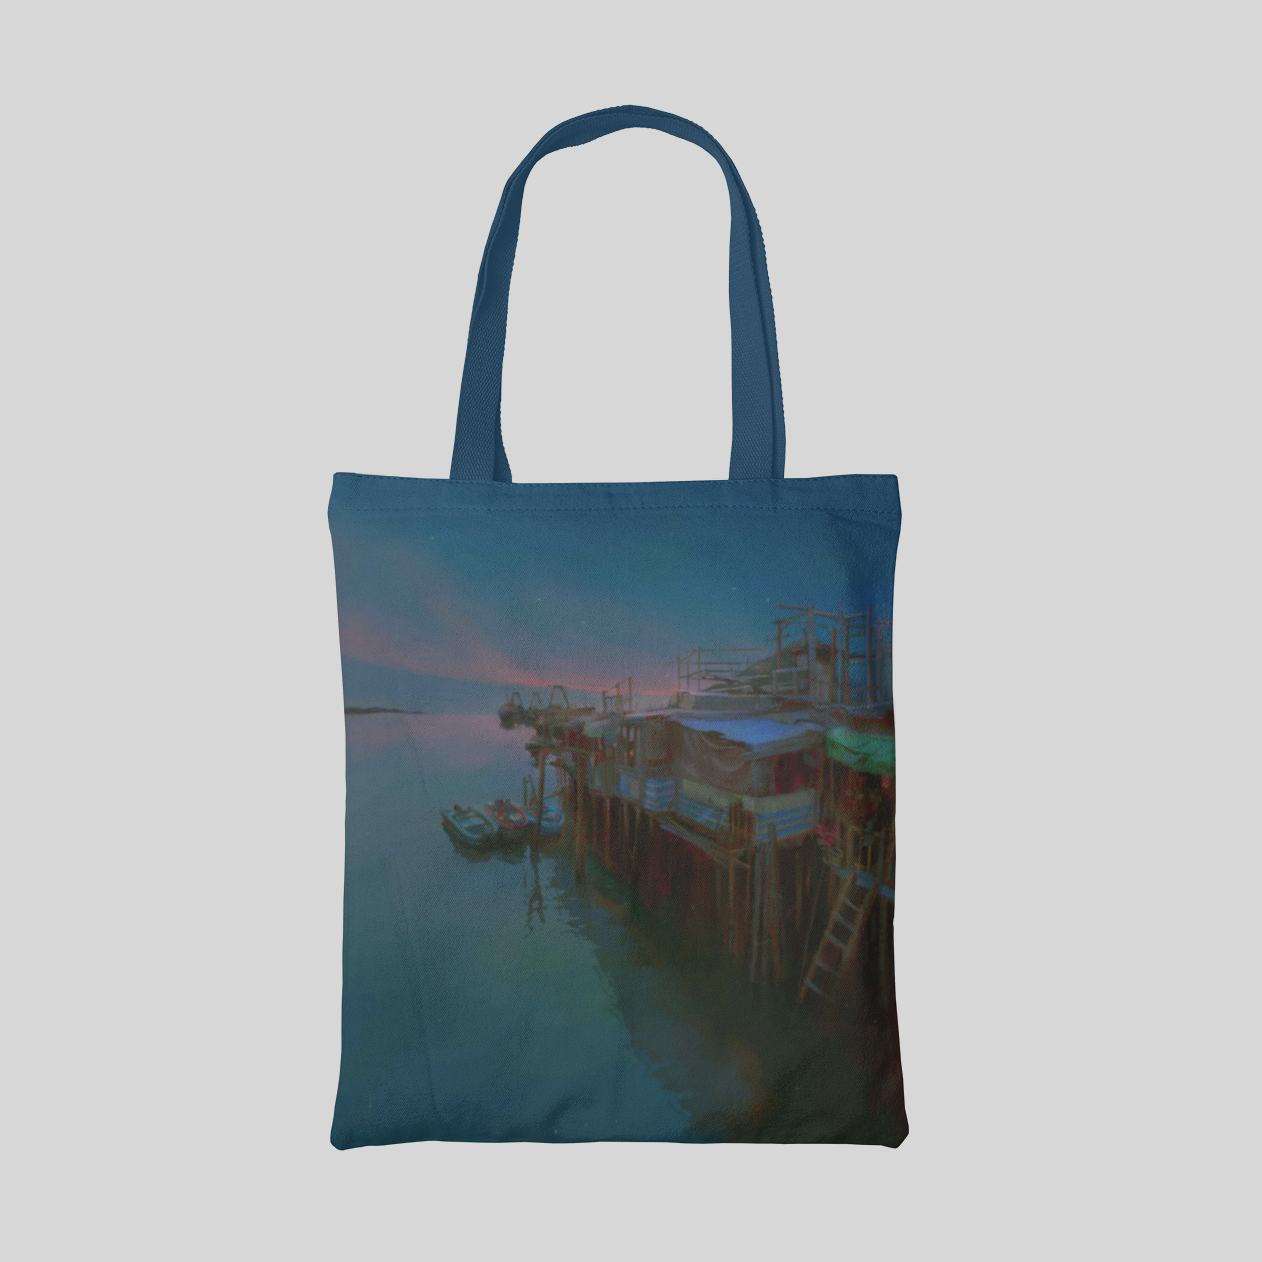 blue nature designed tote bag with stilt houses on water and sunset landscape in Tai O, front side